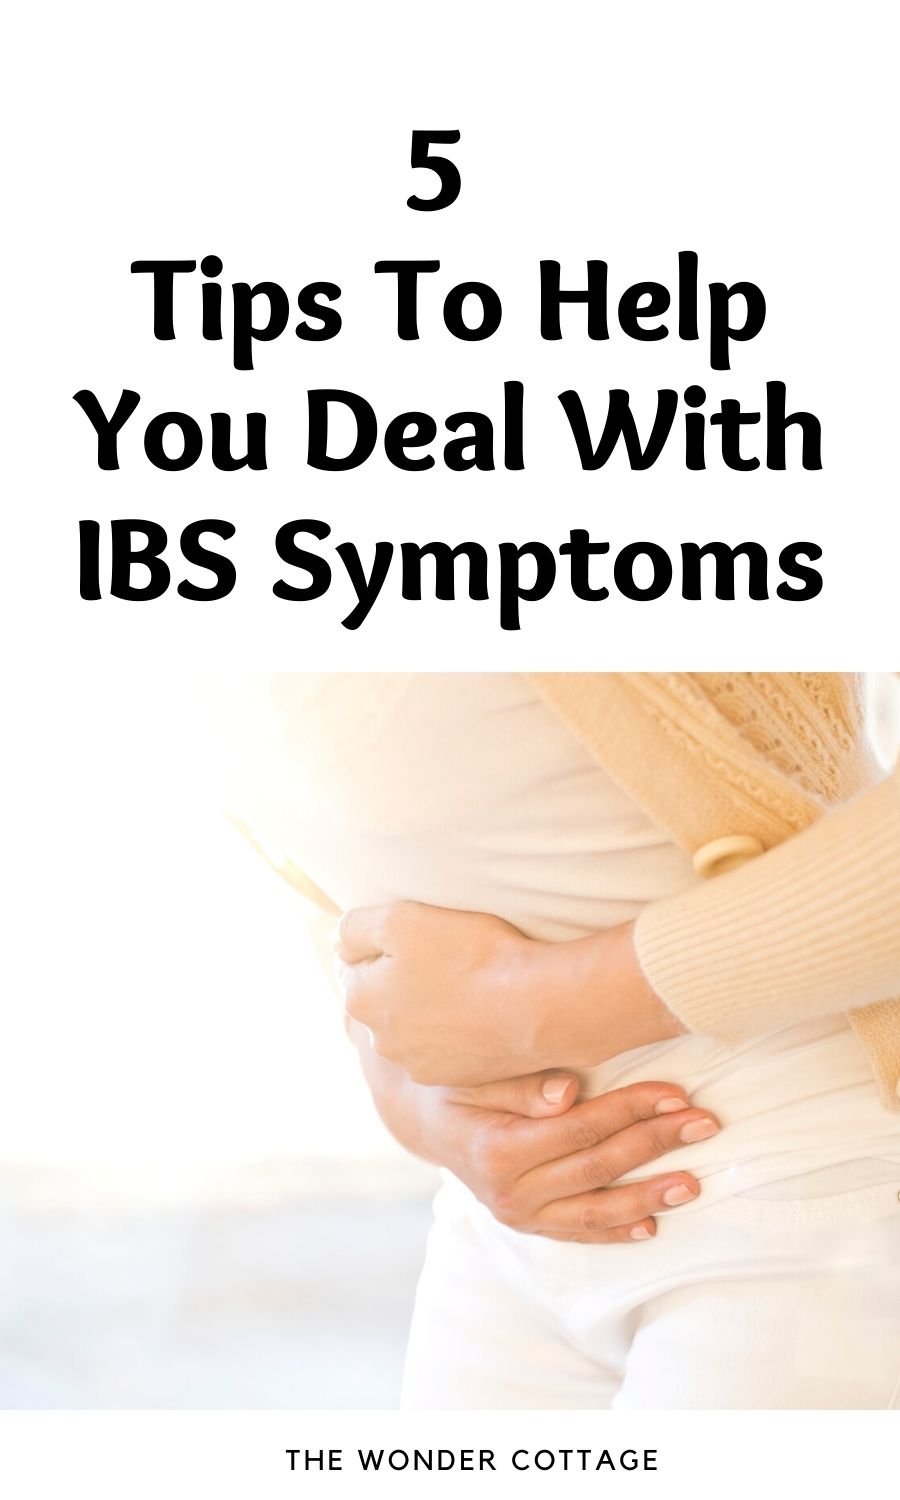 5 Tips To Help You Deal With IBS Symptoms